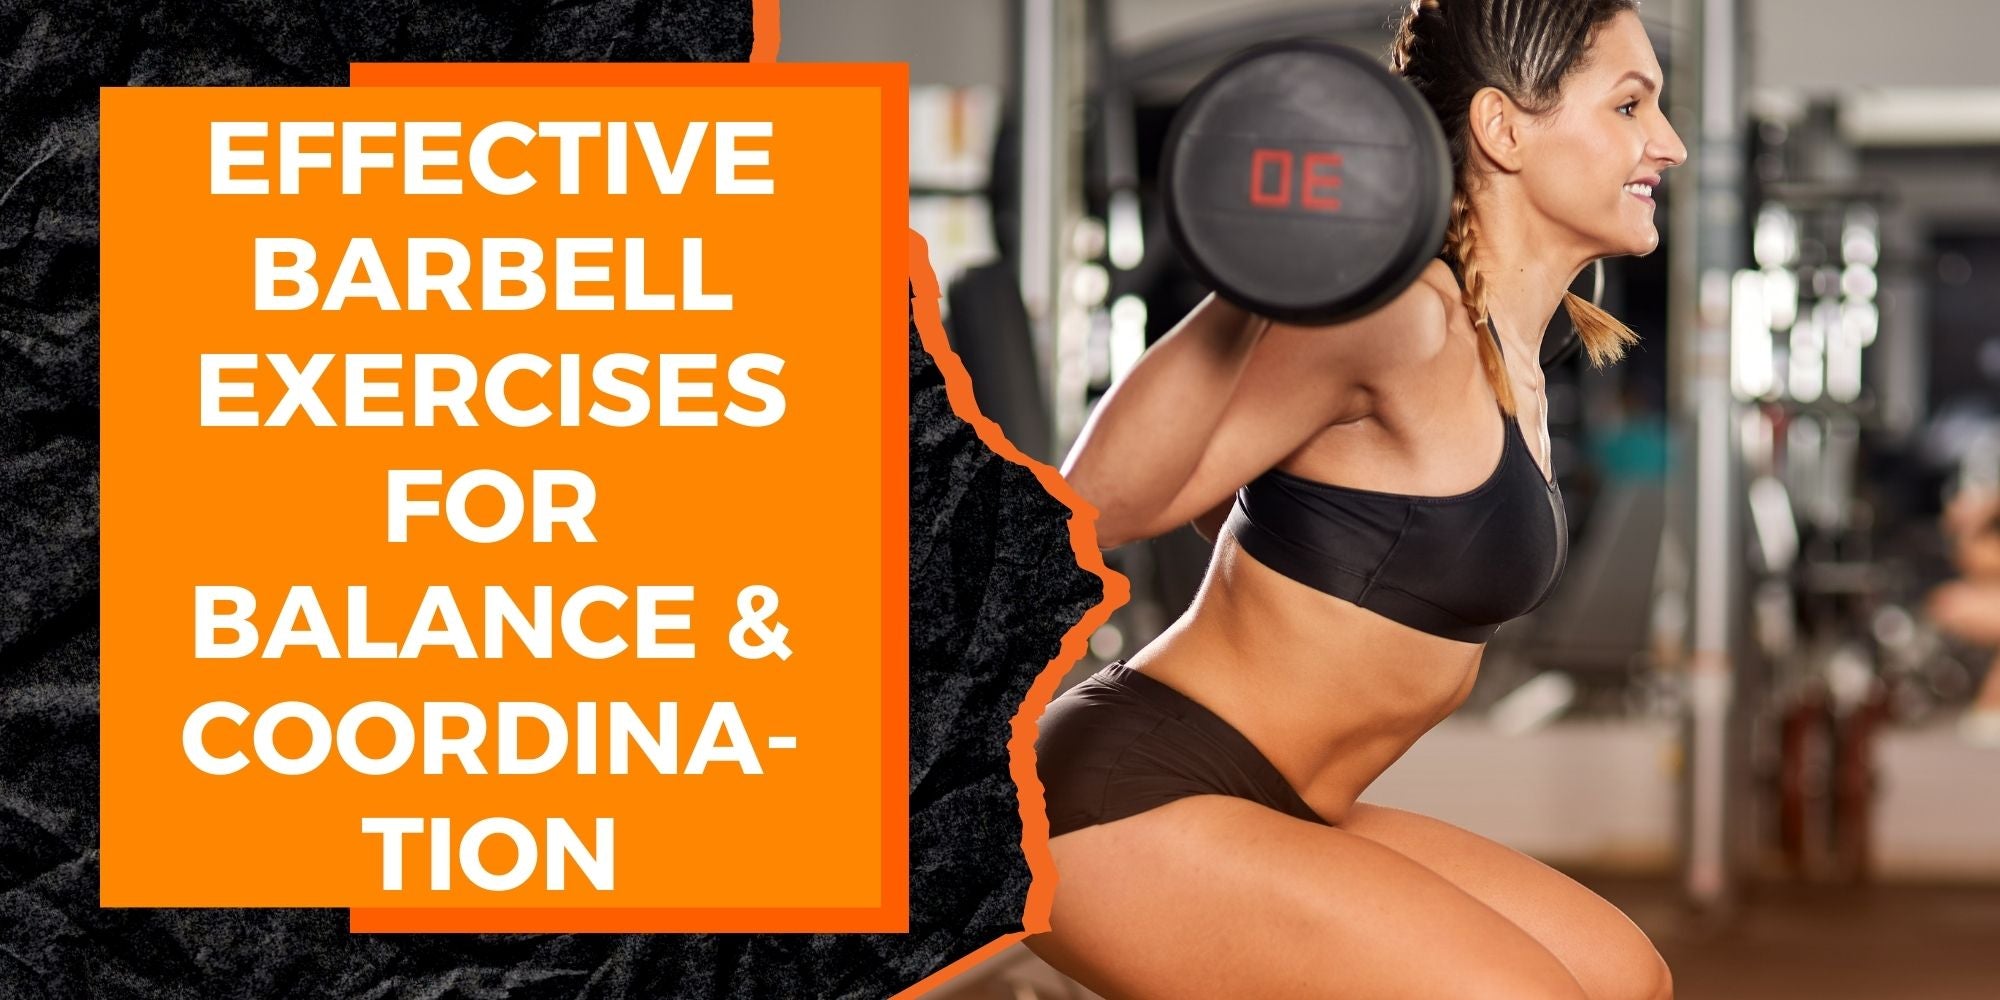 The Most Effective Barbell Exercises for Improving Your Balance and Coordination